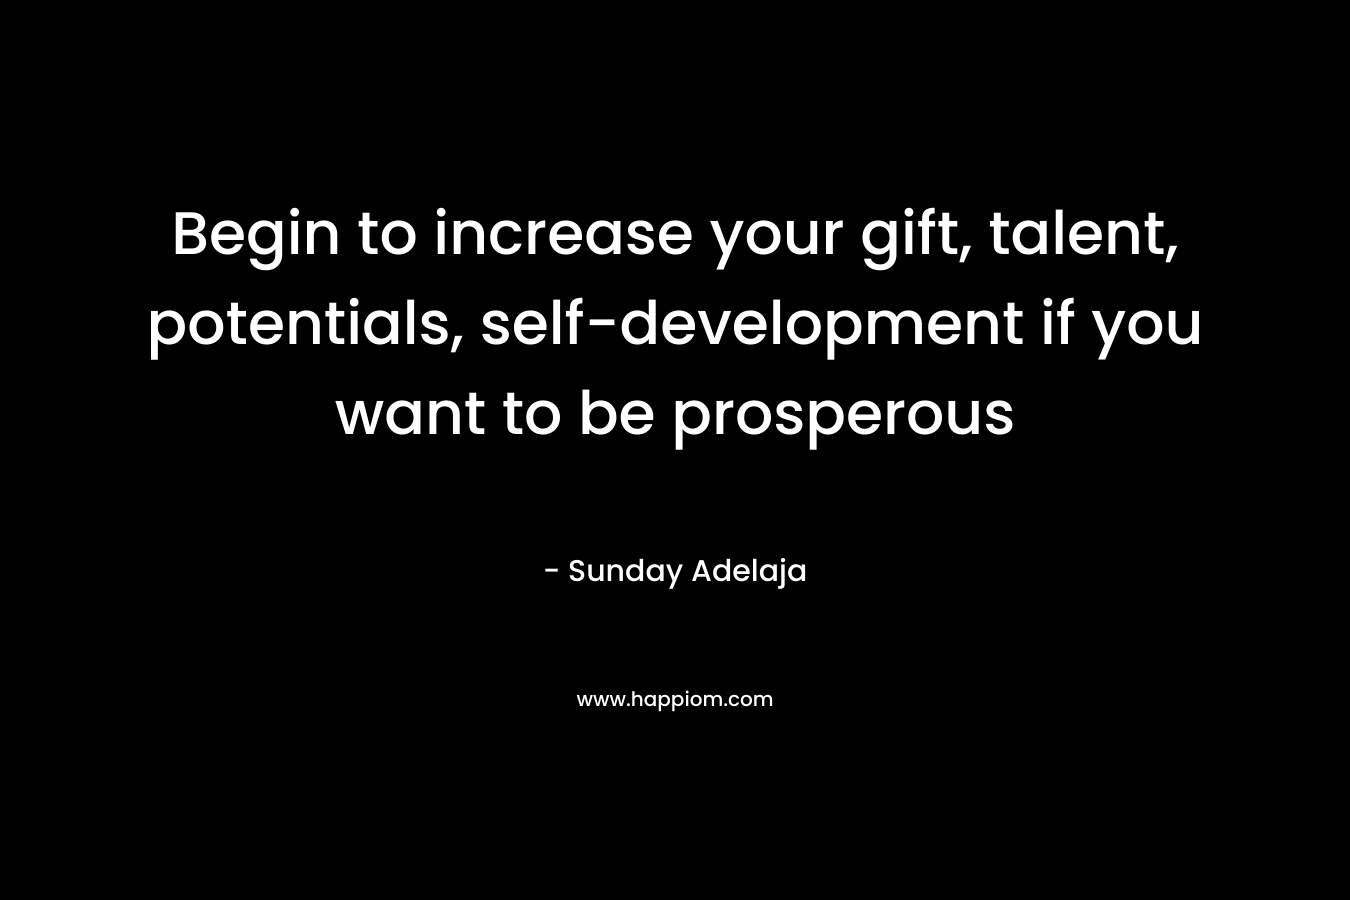 Begin to increase your gift, talent, potentials, self-development if you want to be prosperous – Sunday Adelaja